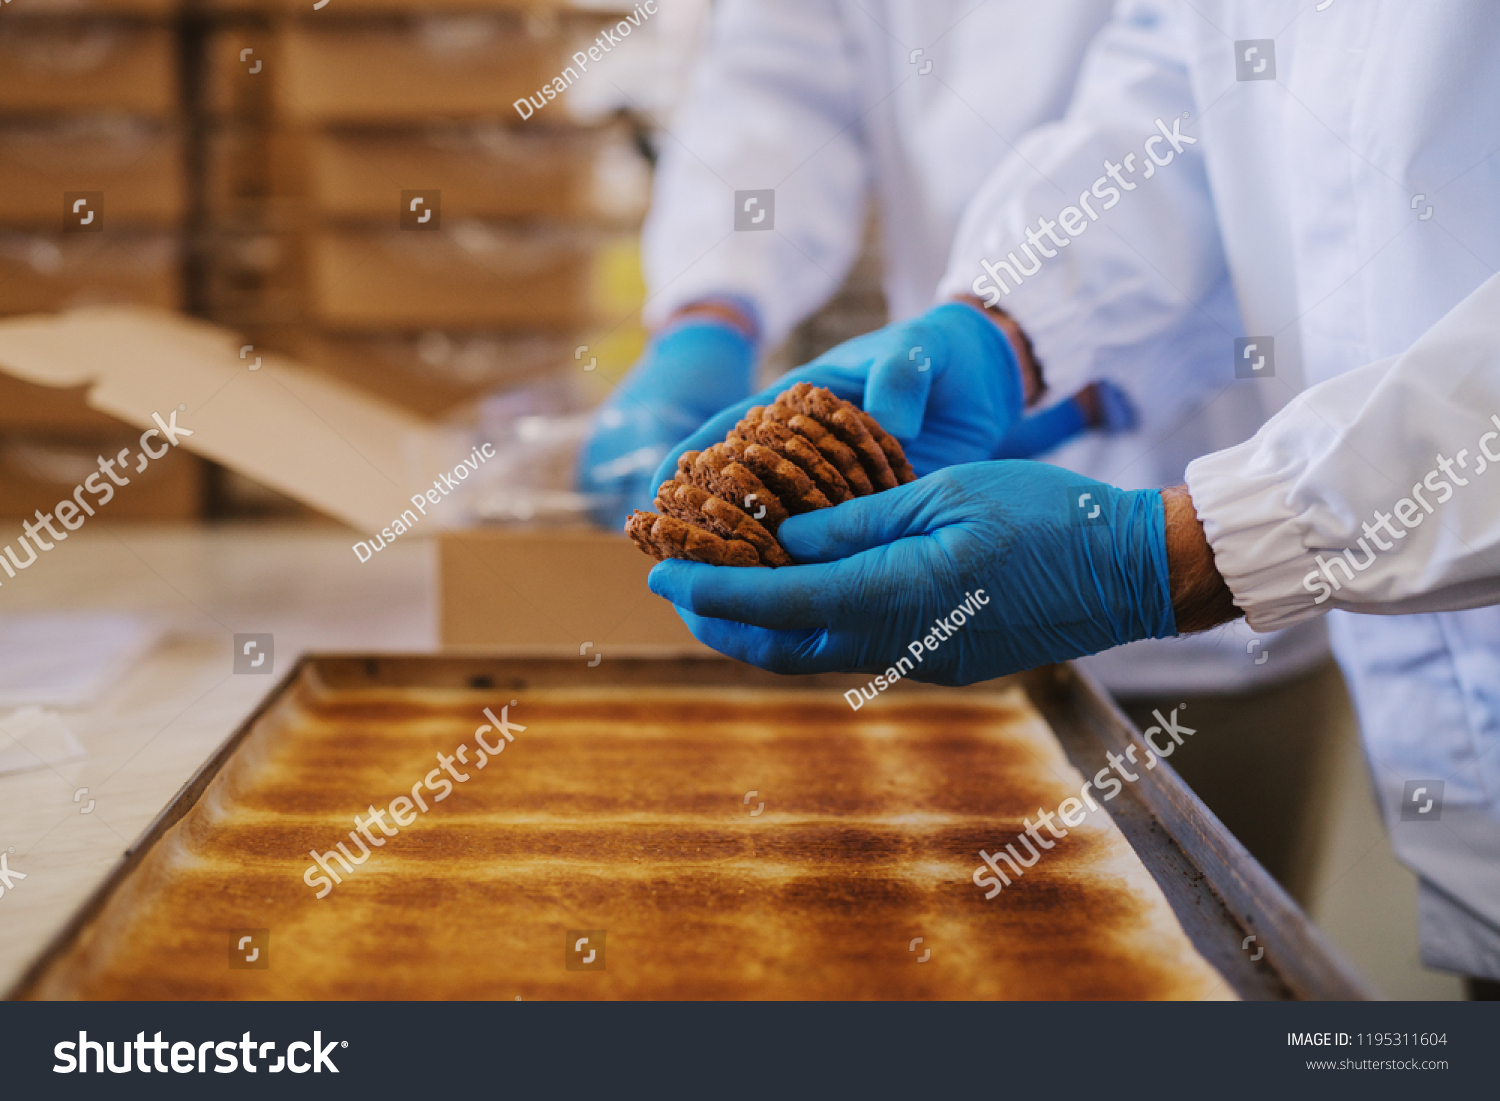 Close up of tray full of fresh baked cookies in food factory. Blurred picture of two male employees in sterile clothes packing cookies in background. #1195311604